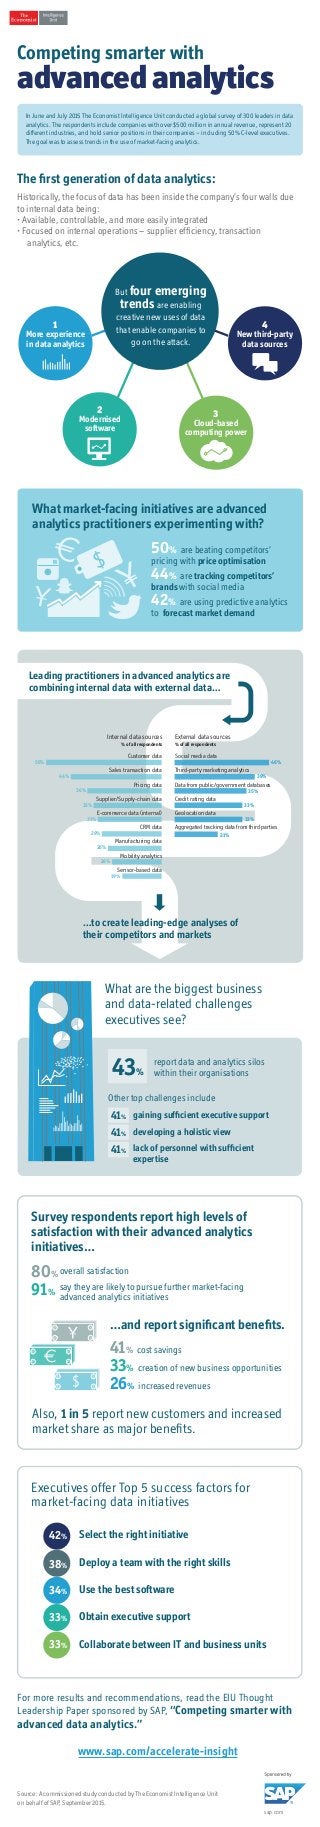 sap.com
What are the biggest business
and data-related challenges
executives see?
Executives offer Top 5 success factors for
market-facing data initiatives
report data and analytics silos
within their organisations
Leading practitioners in advanced analytics are
combining internal data with external data…
External data sources
% of all respondents
Social media data
Third-party marketing analytics
Data from public/government databases
Credit rating data
Geolocation data
Aggregated tracking data from third parties
46%
39%
35%
33%
33%
21%
Internal data sources
% of all respondents
Customer data
Sales transaction data
Pricing data
Supplier/Supply-chain data
E-commerce data (internal)
CRM data
Manufacturing data
Mobility analytics
Sensor-based data
56%
44%
36%
33%
31%
29%
26%
24%
19%
…to create leading-edge analyses of
their competitors and markets
Source: A commissioned study conducted by The Economist Intelligence Unit
on behalf of SAP, September 2015.
For more results and recommendations, read the EIU Thought
Leadership Paper sponsored by SAP, “Competing smarter with
advanced data analytics.”
Competing smarter with
advanced analytics
In June and July 2015 The Economist Intelligence Unit conducted a global survey of 300 leaders in data
analytics. The respondents include companies with over $500 million in annual revenue, represent 20
different industries, and hold senior positions in their companies – including 50% C-level executives.
The goal was to assess trends in the use of market-facing analytics.
The first generation of data analytics:
Historically, the focus of data has been inside the company’s four walls due
to internal data being:
• Available, controllable, and more easily integrated
• Focused on internal operations – supplier efficiency, transaction
analytics, etc.
2
Modernised
software
1
More experience
in data analytics
4
New third-party
data sources
But four emerging
trends are enabling
creative new uses of data
that enable companies to
go on the attack.
3
Cloud-based
computing power
What market-facing initiatives are advanced
analytics practitioners experimenting with?
50% are beating competitors’
pricing with price optimisation
44% are tracking competitors’
brands with social media
42% are using predictive analytics
to forecast market demand
…and report significant benefits.
Survey respondents report high levels of
satisfaction with their advanced analytics
initiatives…
Also, 1 in 5 report new customers and increased
market share as major benefits.
80%
91%
overall satisfaction
say they are likely to pursue further market-facing
advanced analytics initiatives
41% cost savings
33% creation of new business opportunities
26% increased revenues
Select the right initiative
Deploy a team with the right skills
Use the best software
Obtain executive support
Collaborate between IT and business units
42%
38%
34%
33%
33%
43%
Other top challenges include
gaining sufficient executive support
developing a holistic view
lack of personnel with sufficient
expertise
41%
41%
41%
www.sap.com/accelerate-insight
 